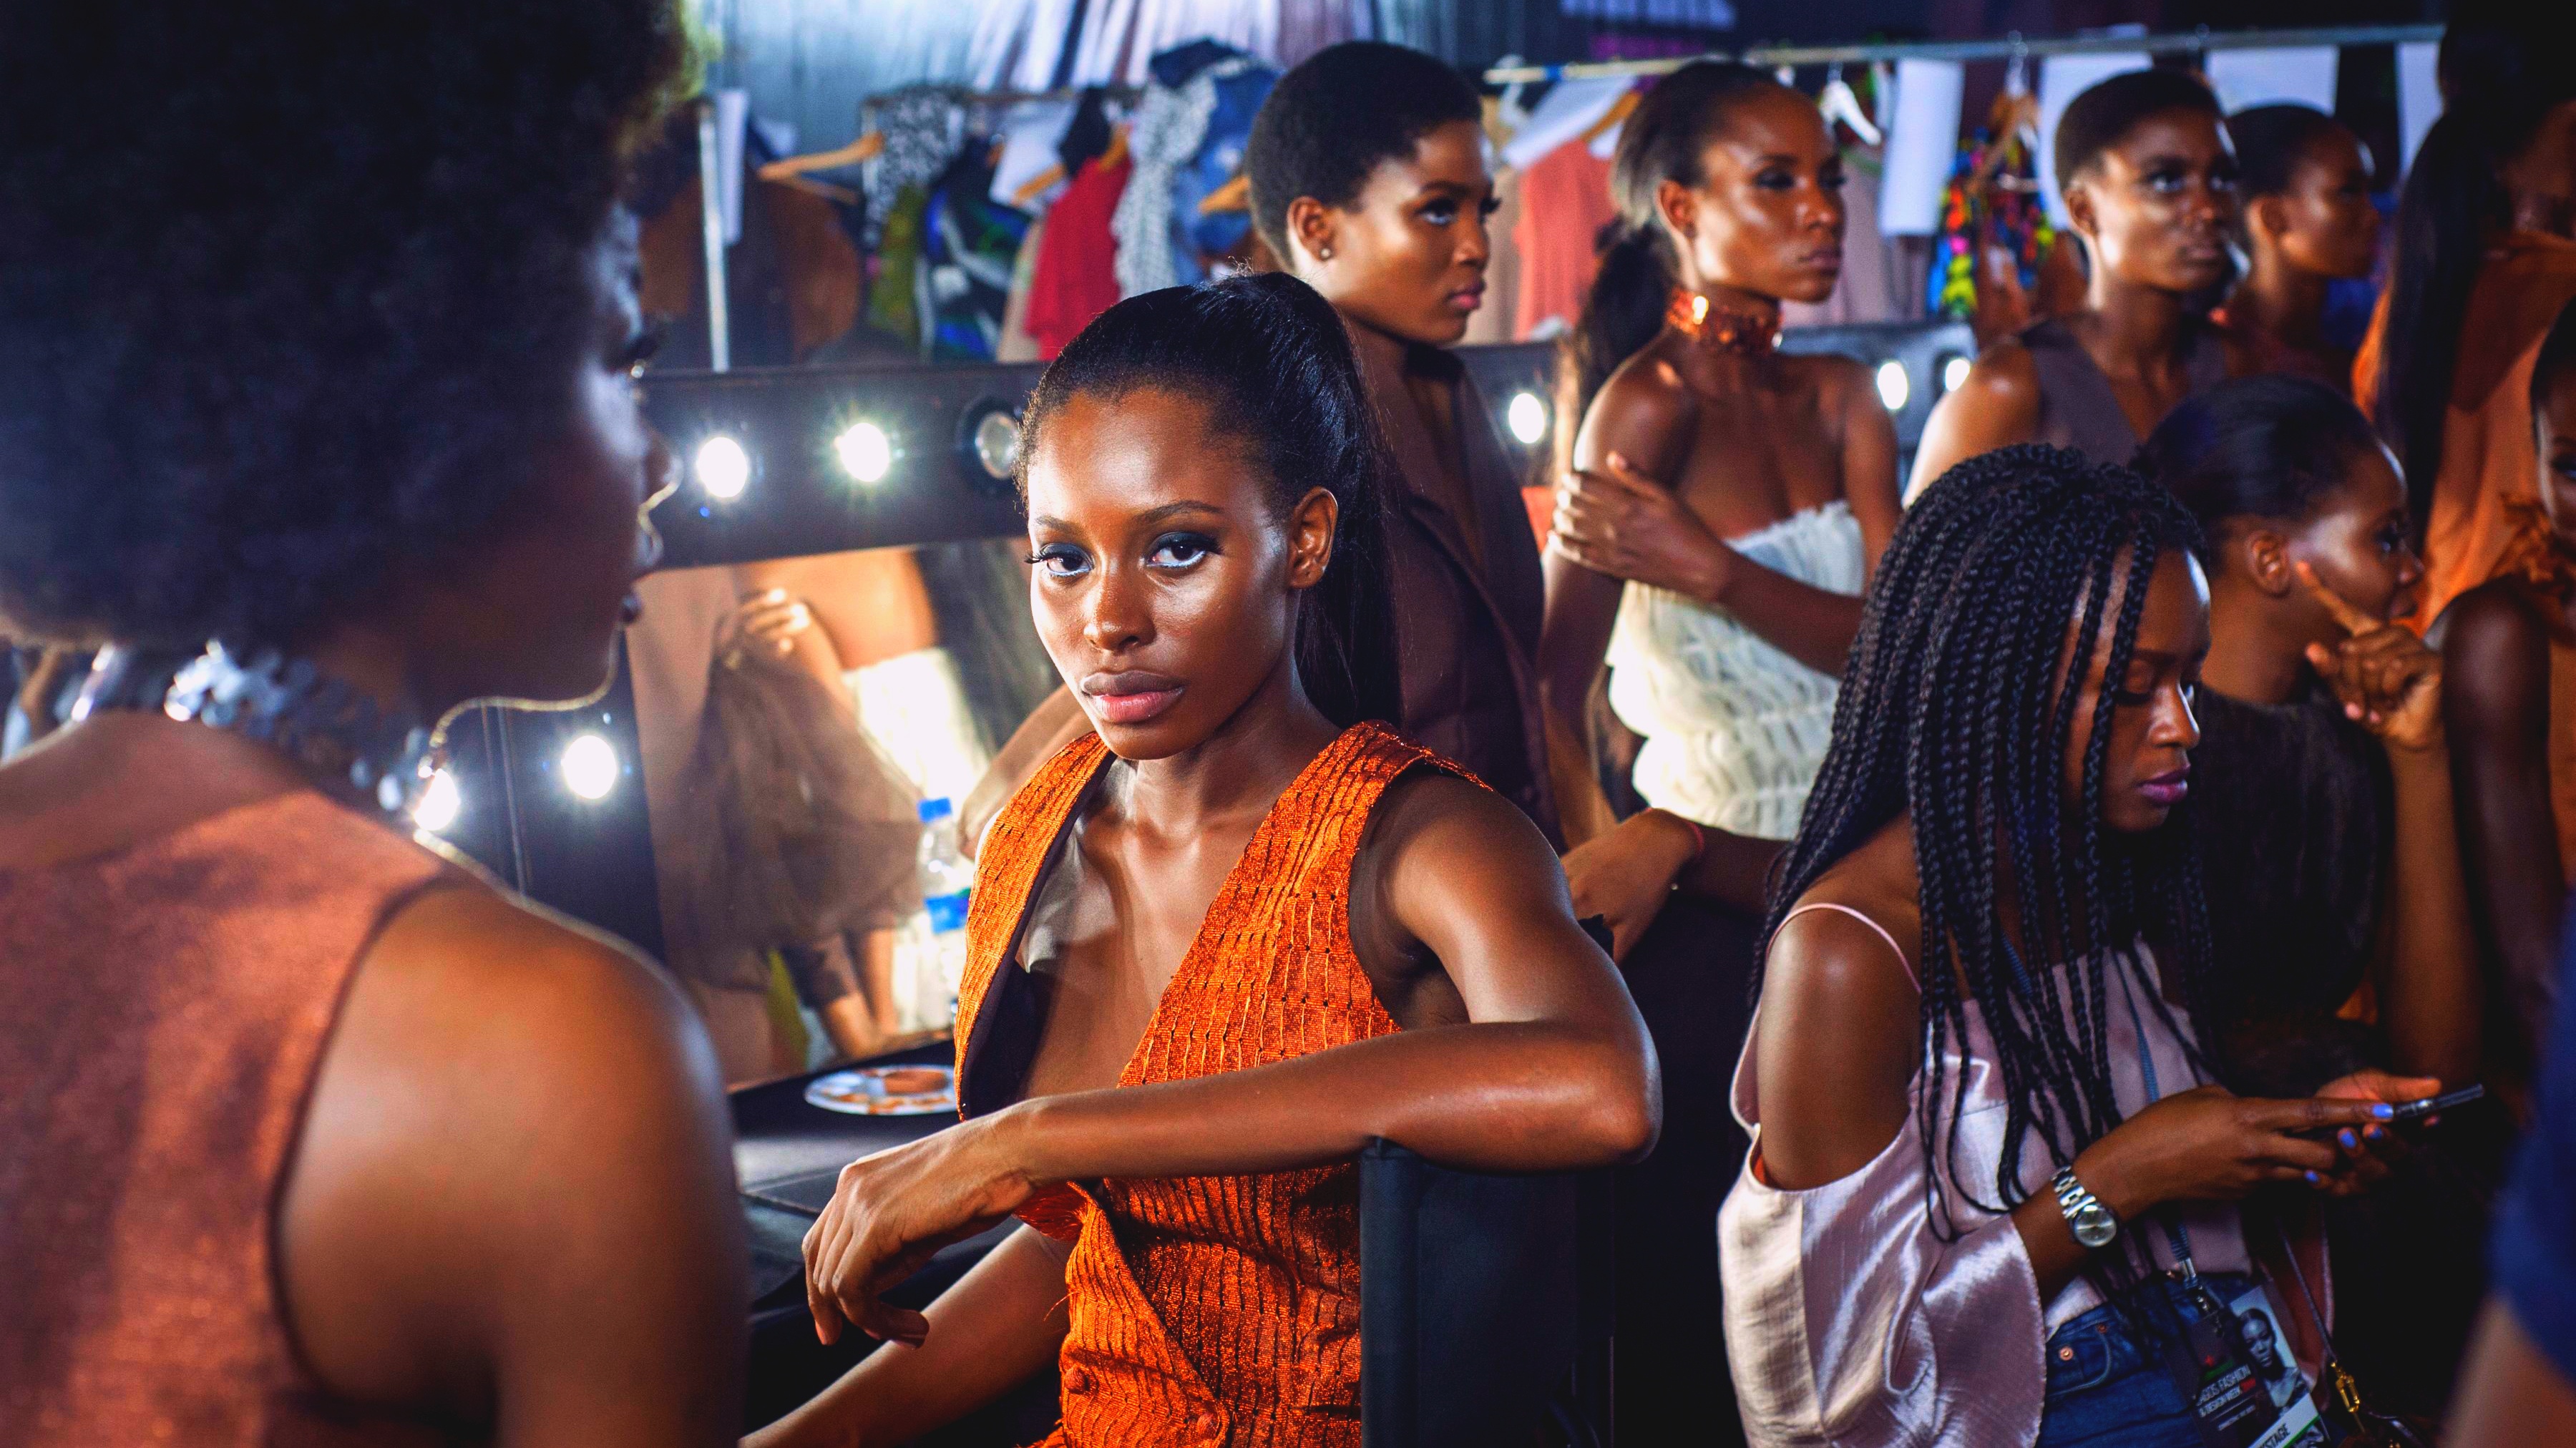 Models get ready backstage at Lagos Fashion and Design Week